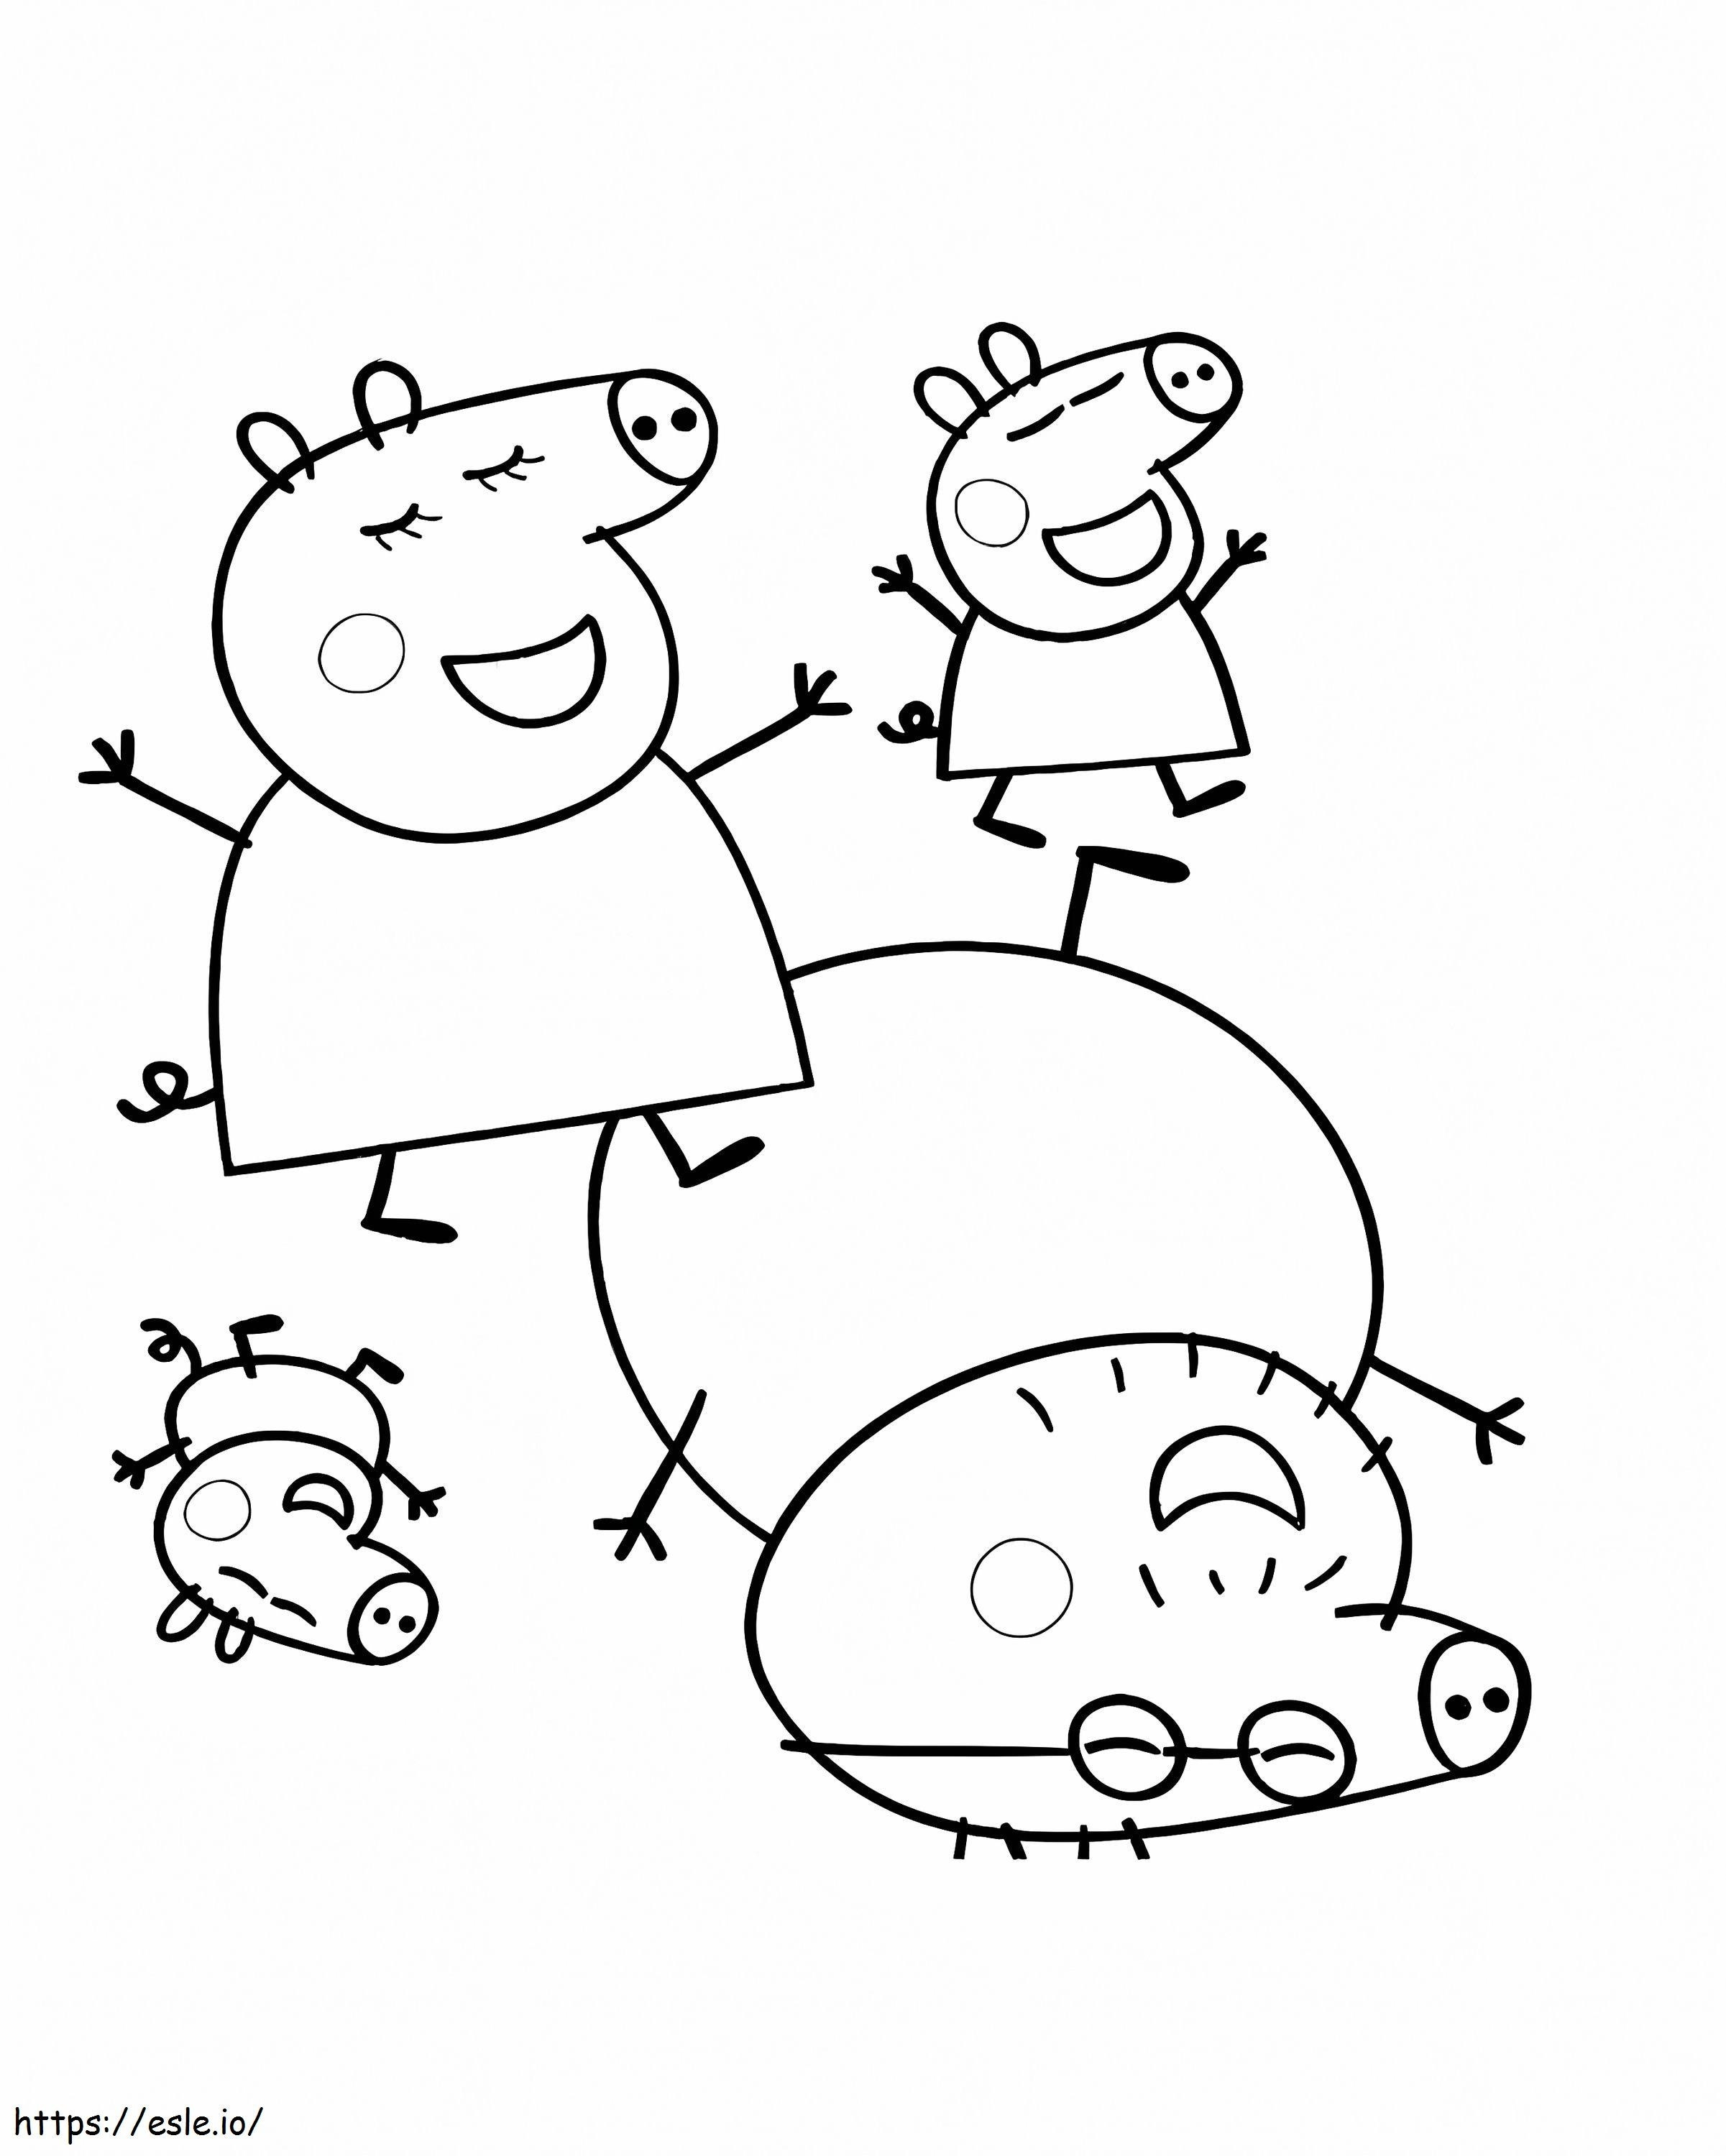 Happy Peppa Pig Family coloring page